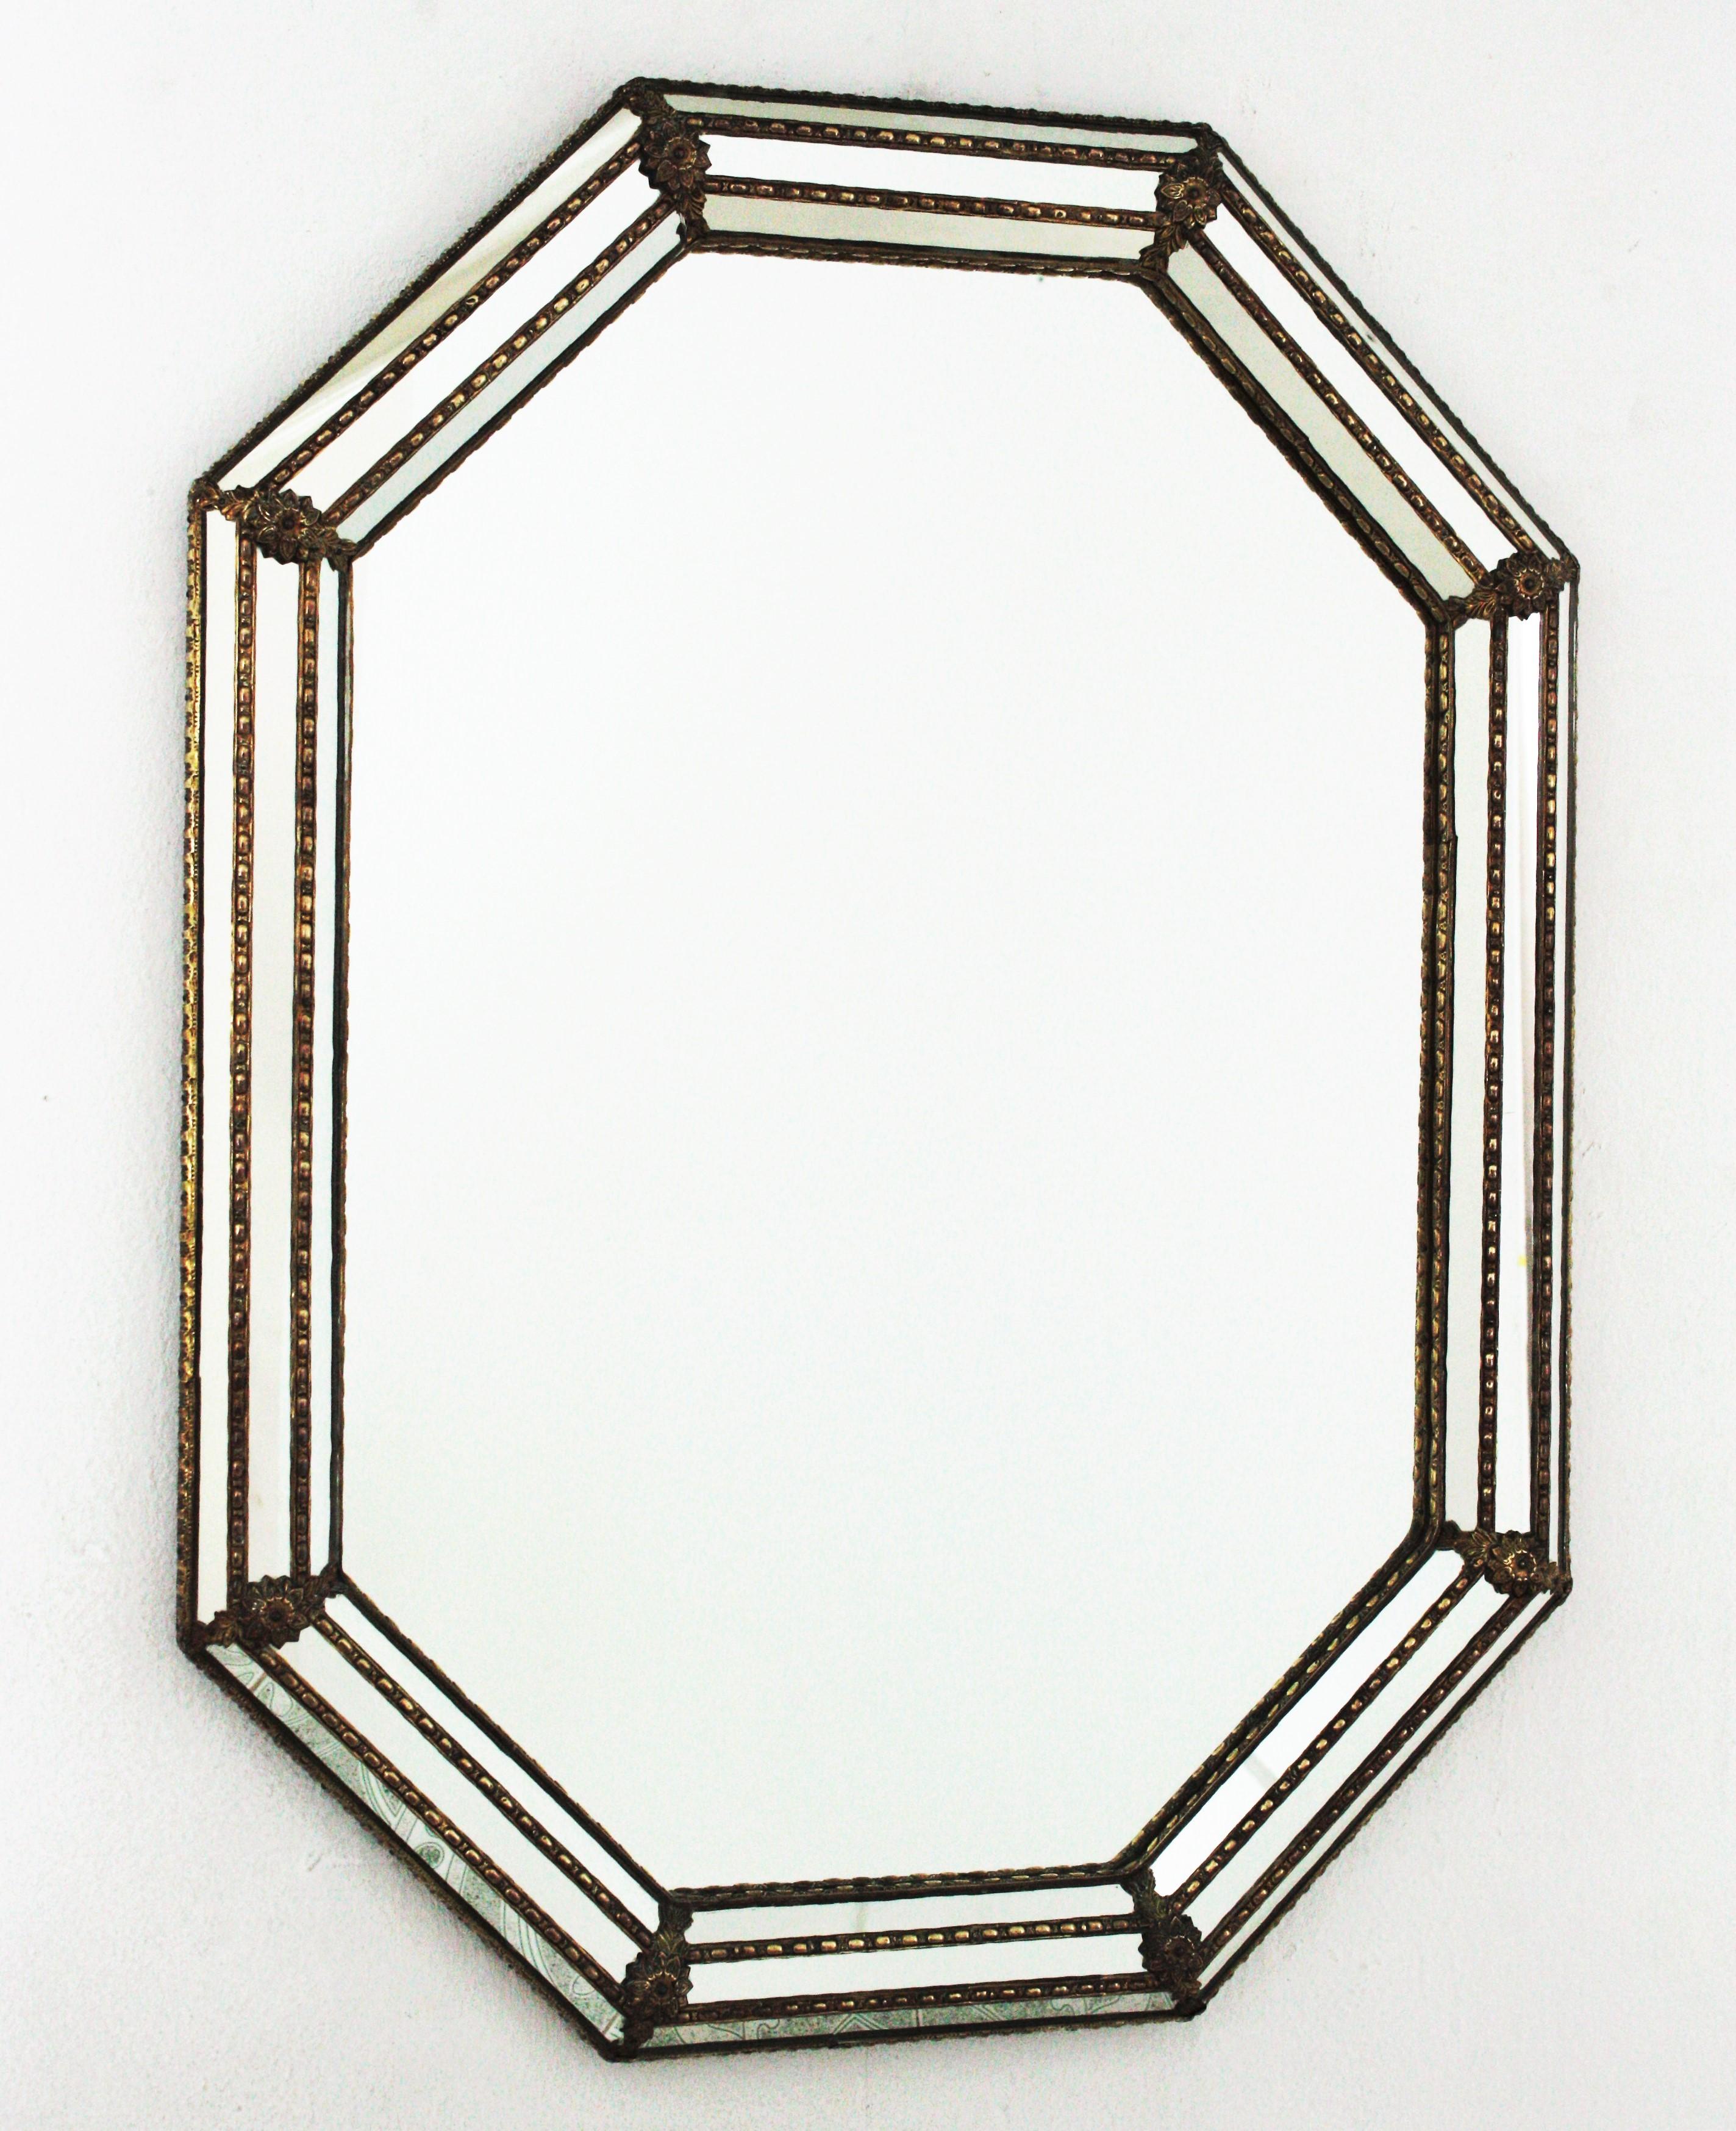 Venetian style octagonal wall mirror with gilt metal accents, Spain, 1950s
This octagonal mirror has a triple mirror frame. The mirrored panels are adorned by metal patterns and flowers.
This wall mirror will be perfect in a contemporary or